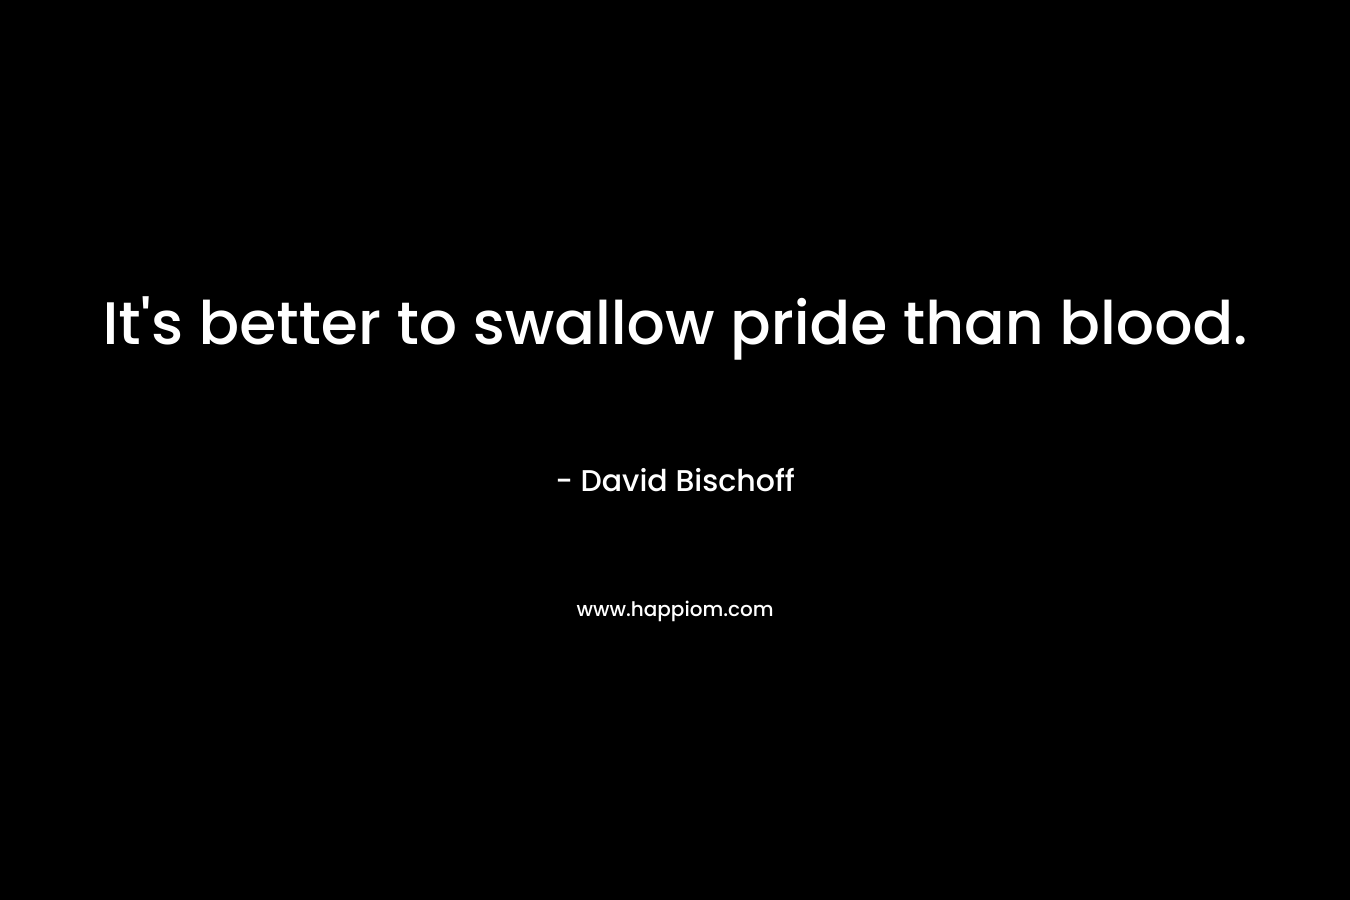 It’s better to swallow pride than blood. – David Bischoff